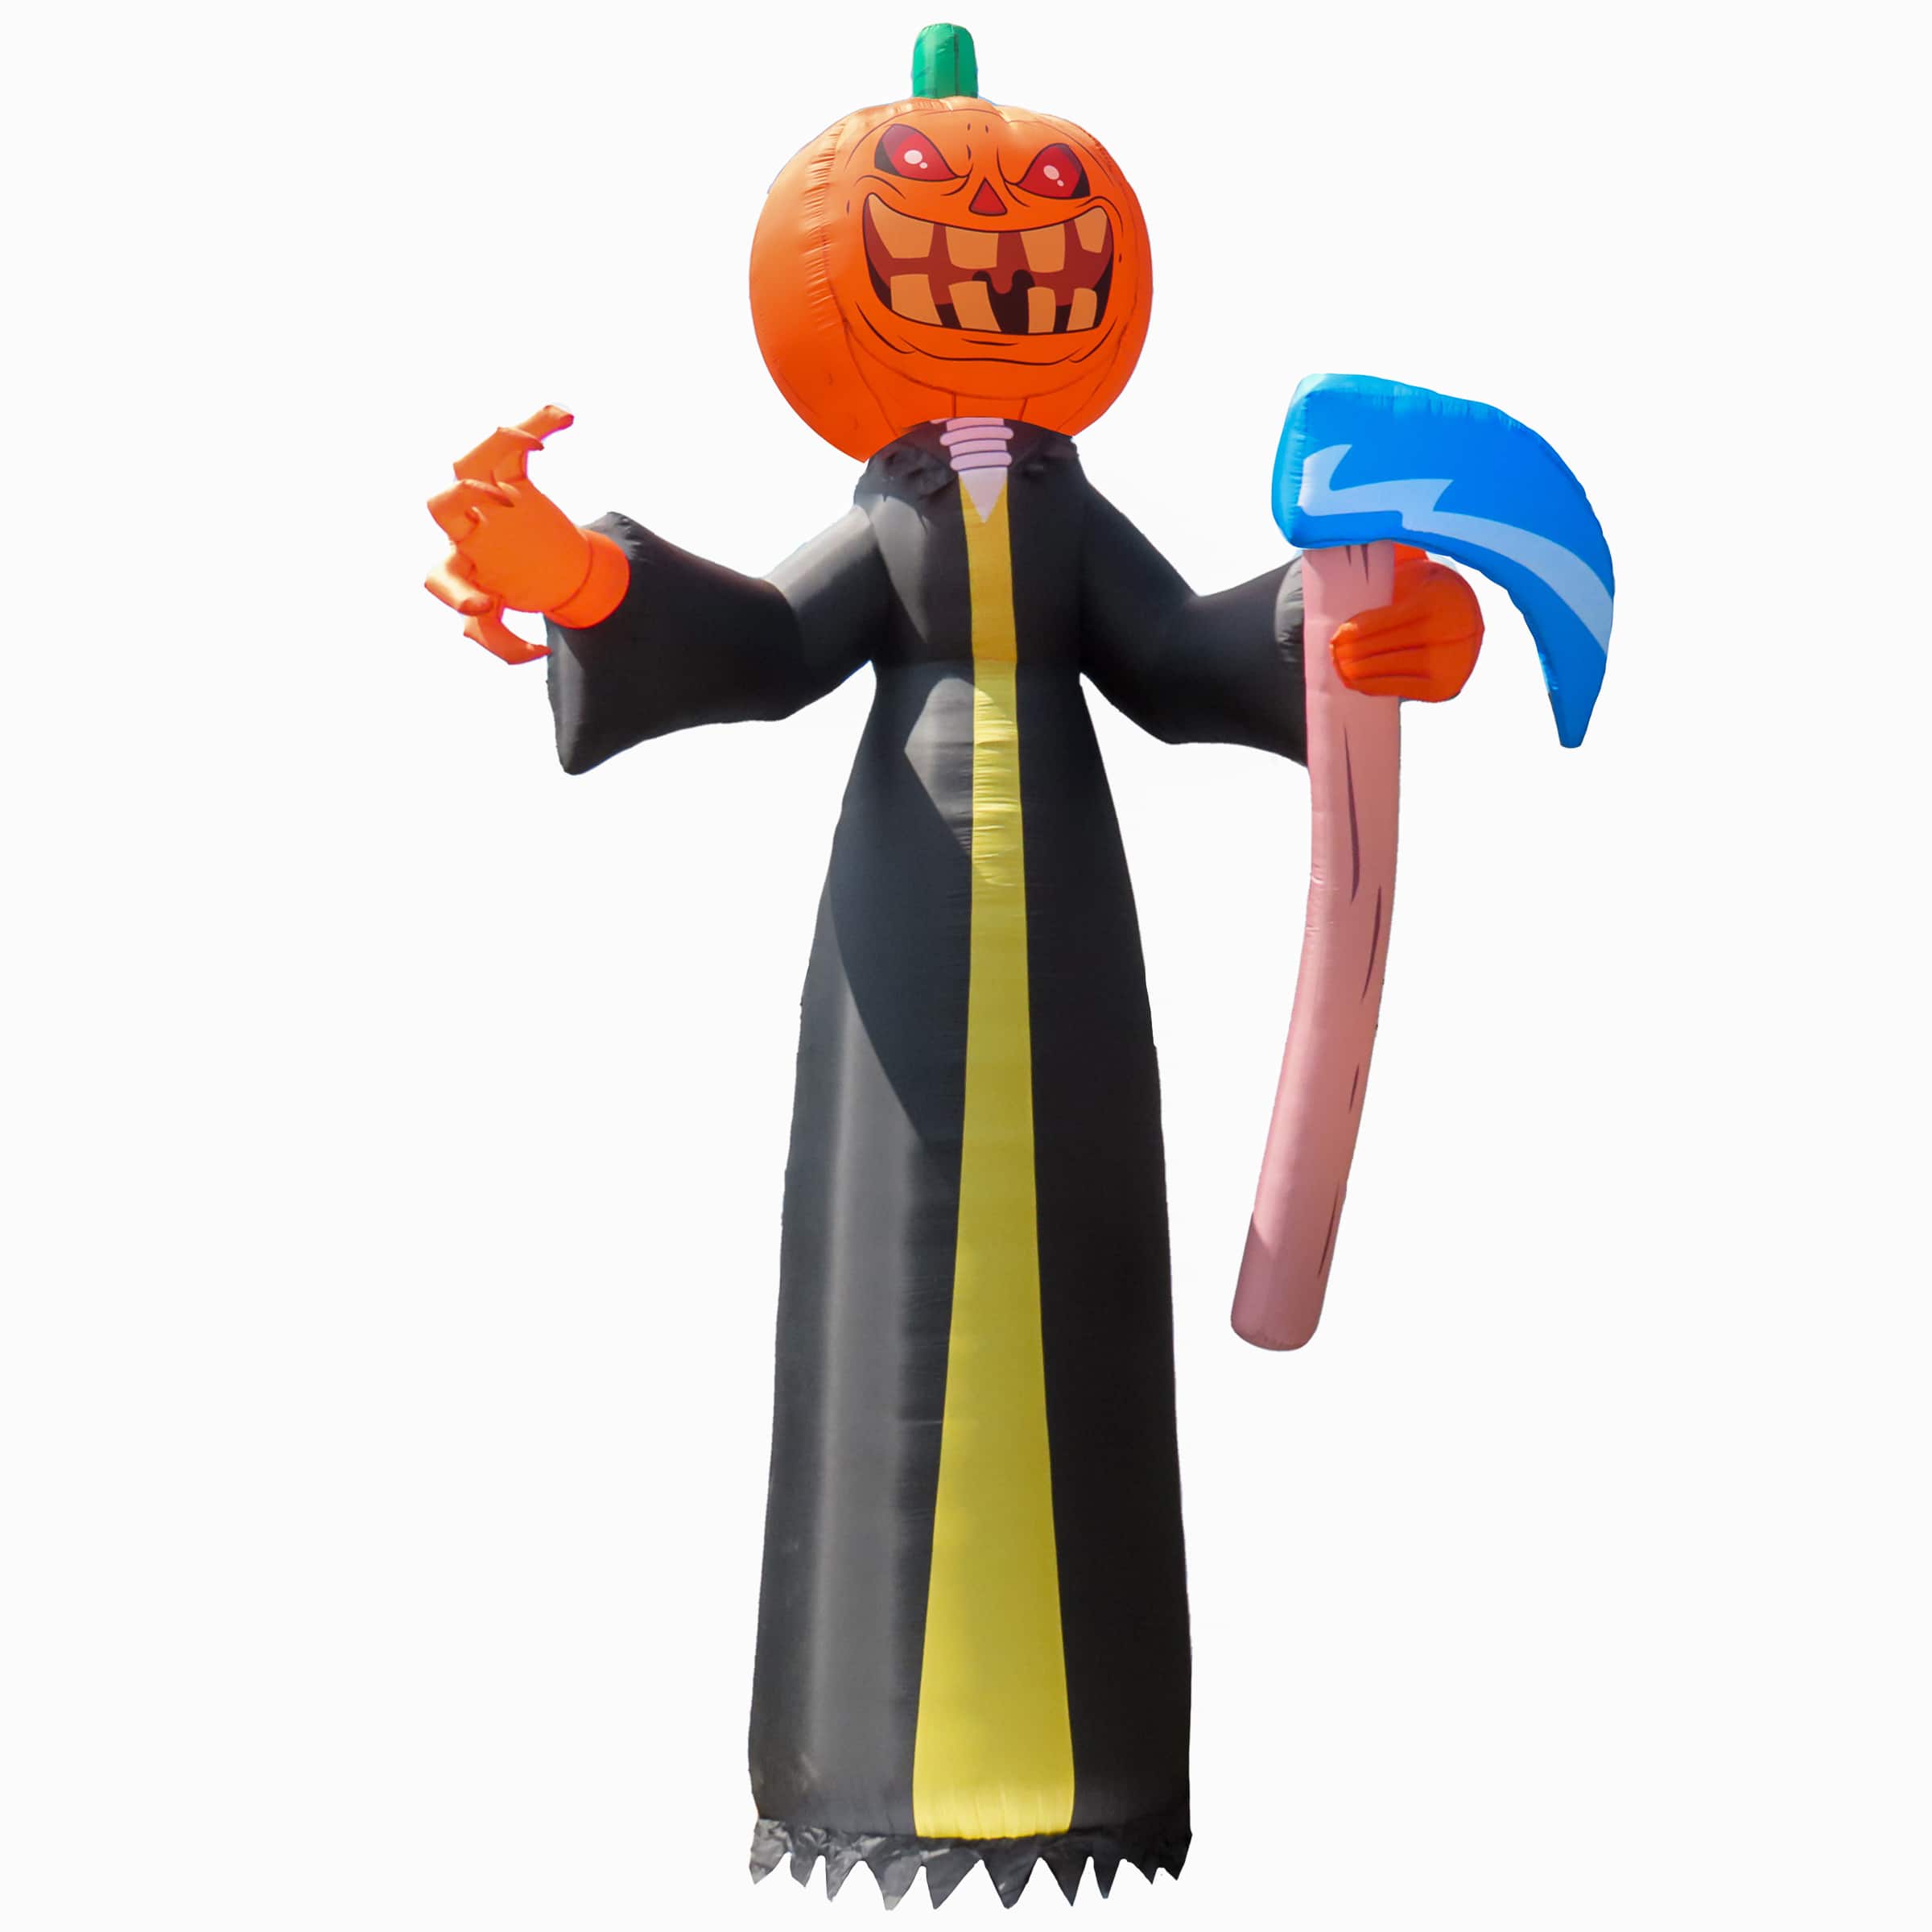 20ft. Inflatable Halloween Pumpkin Reaper Decoration with LED lights